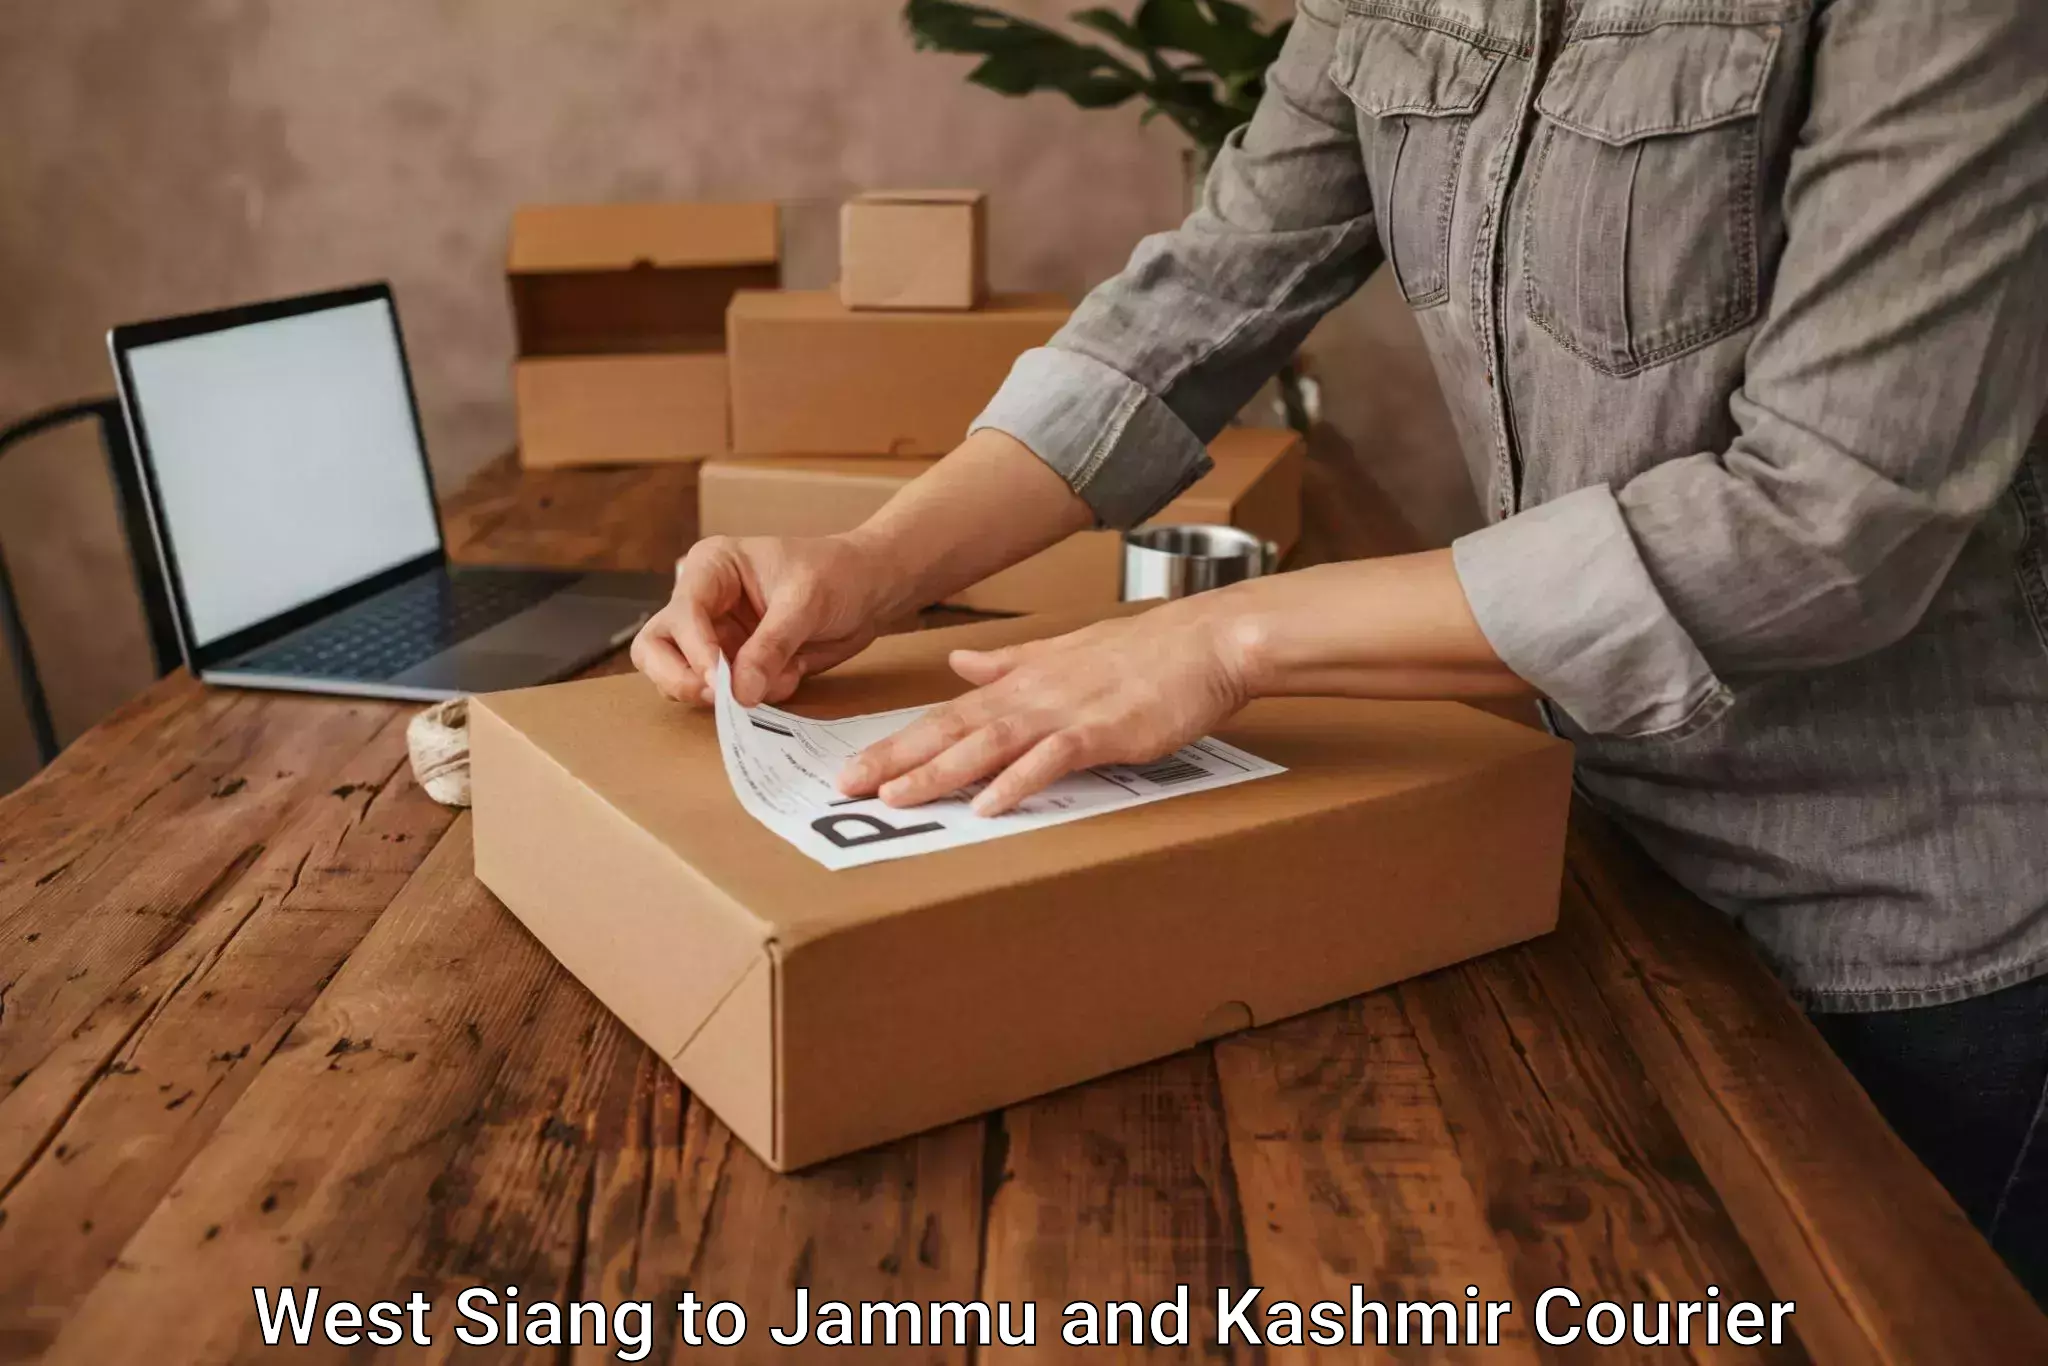 International parcel service West Siang to Jammu